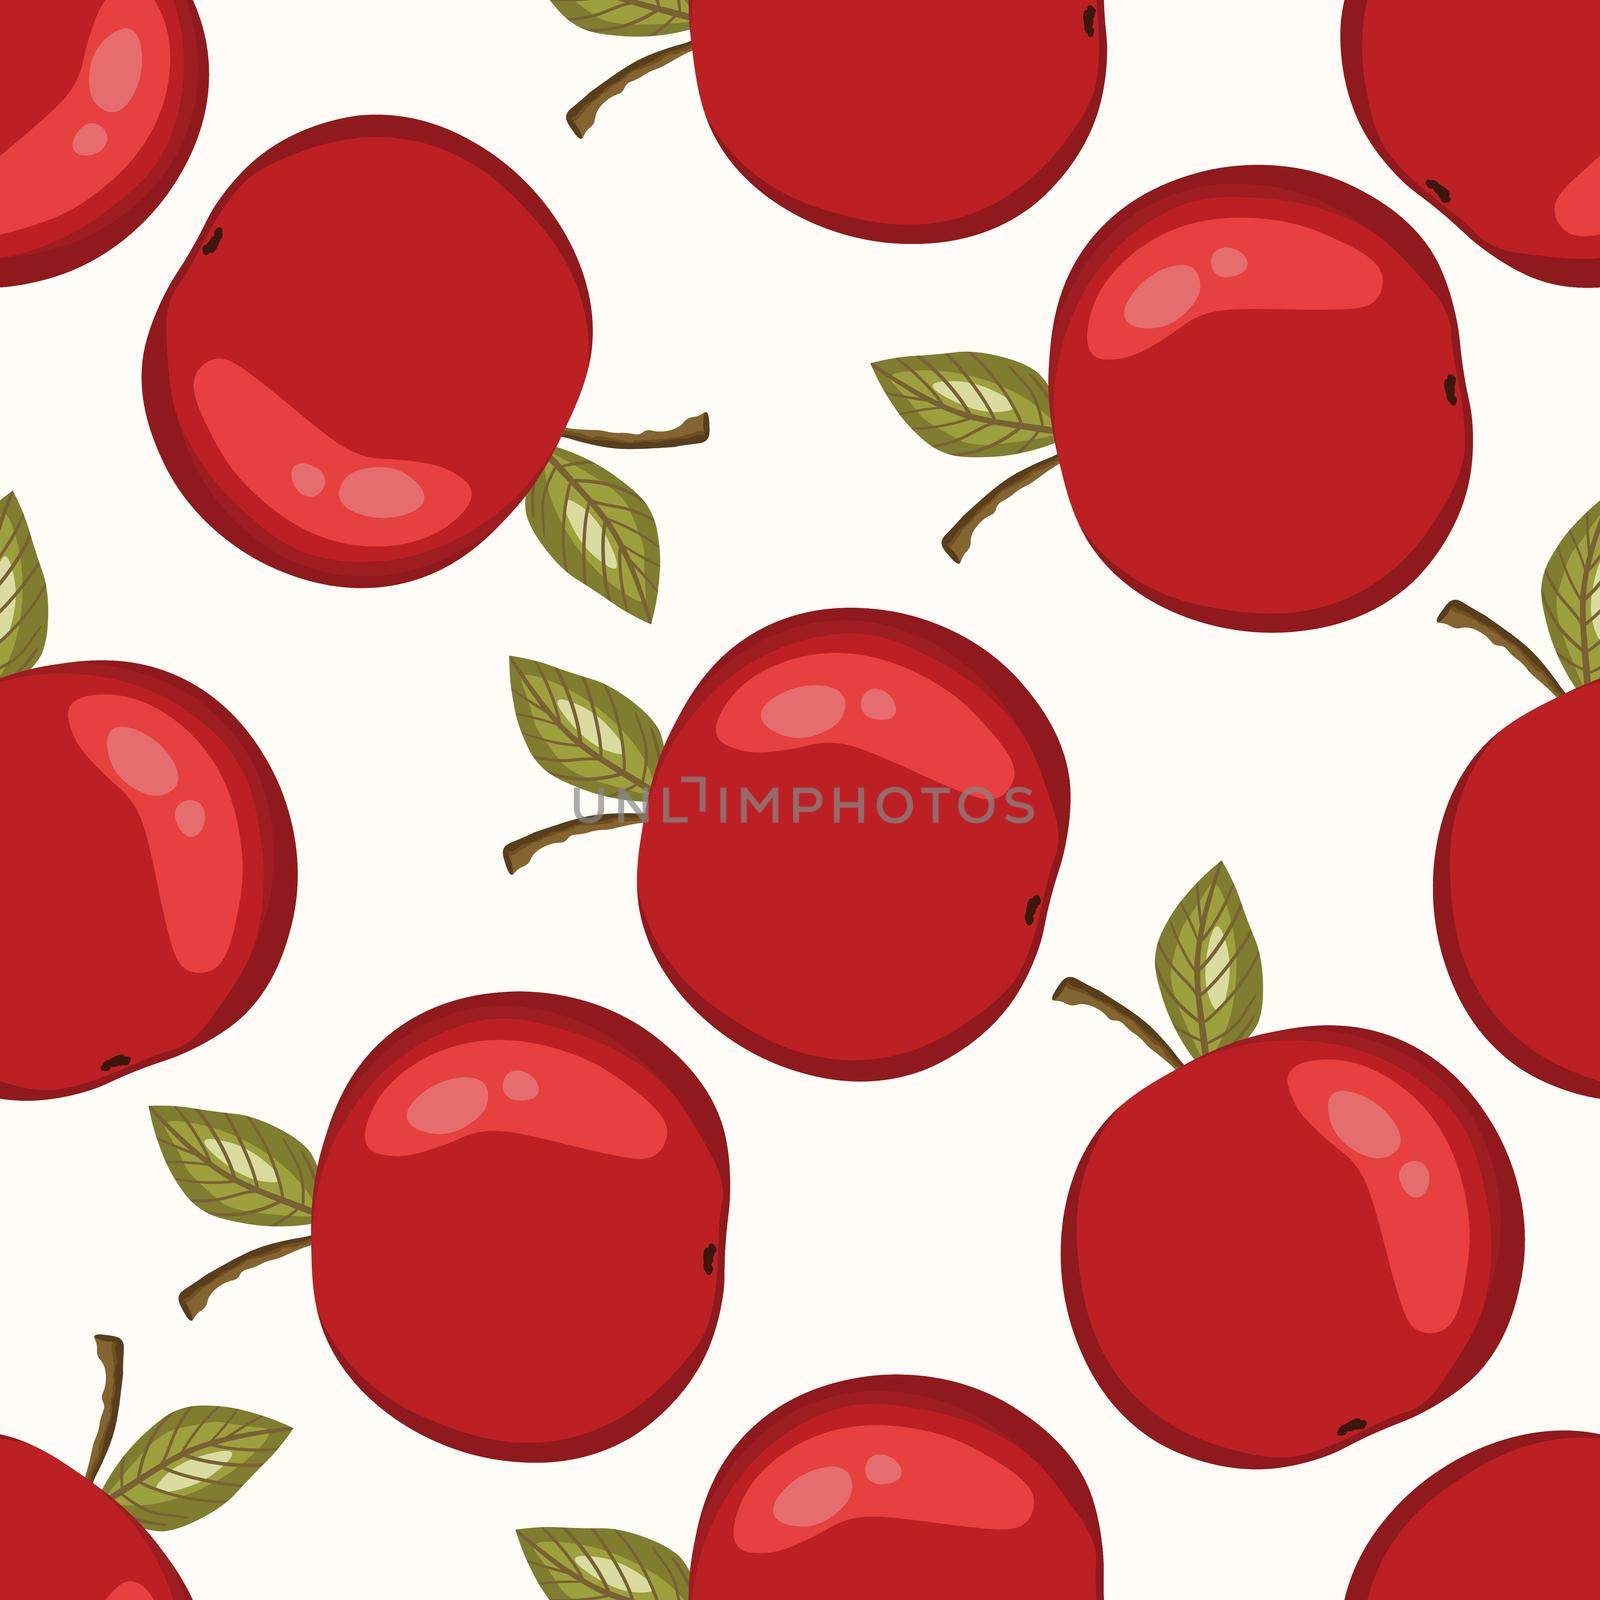 Seamless pattern with apple on white background. Natural delicious fresh tasty fruit. Vector illustration for print, fabric, textile, banner, other design. Stylized apples with leaves. Food concept by allaku